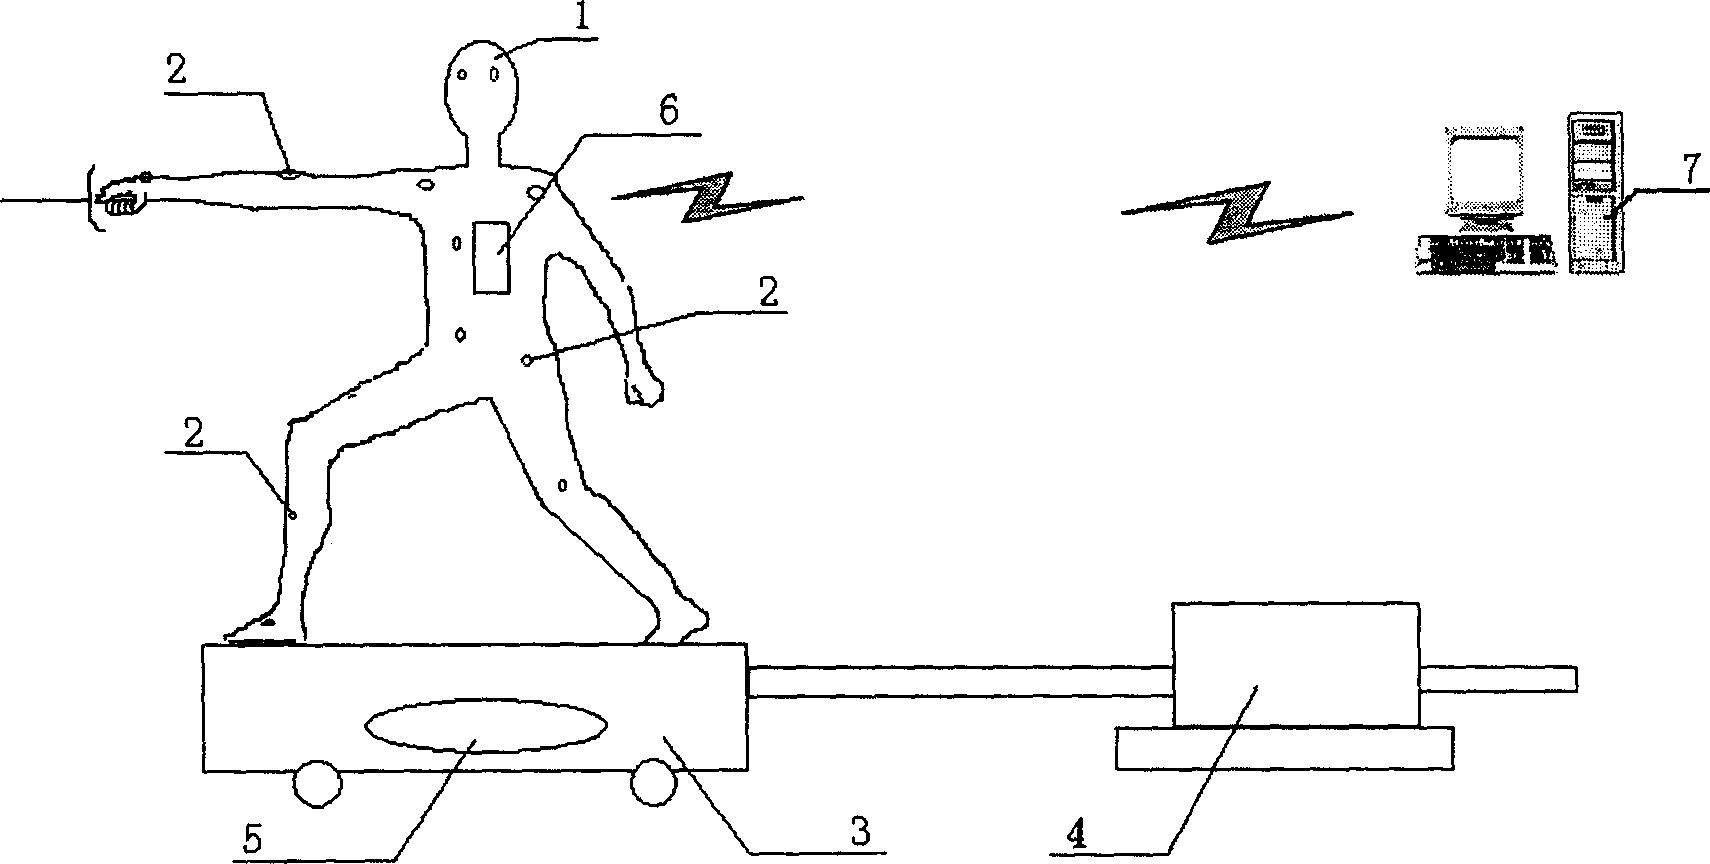 Fencing training guidance system